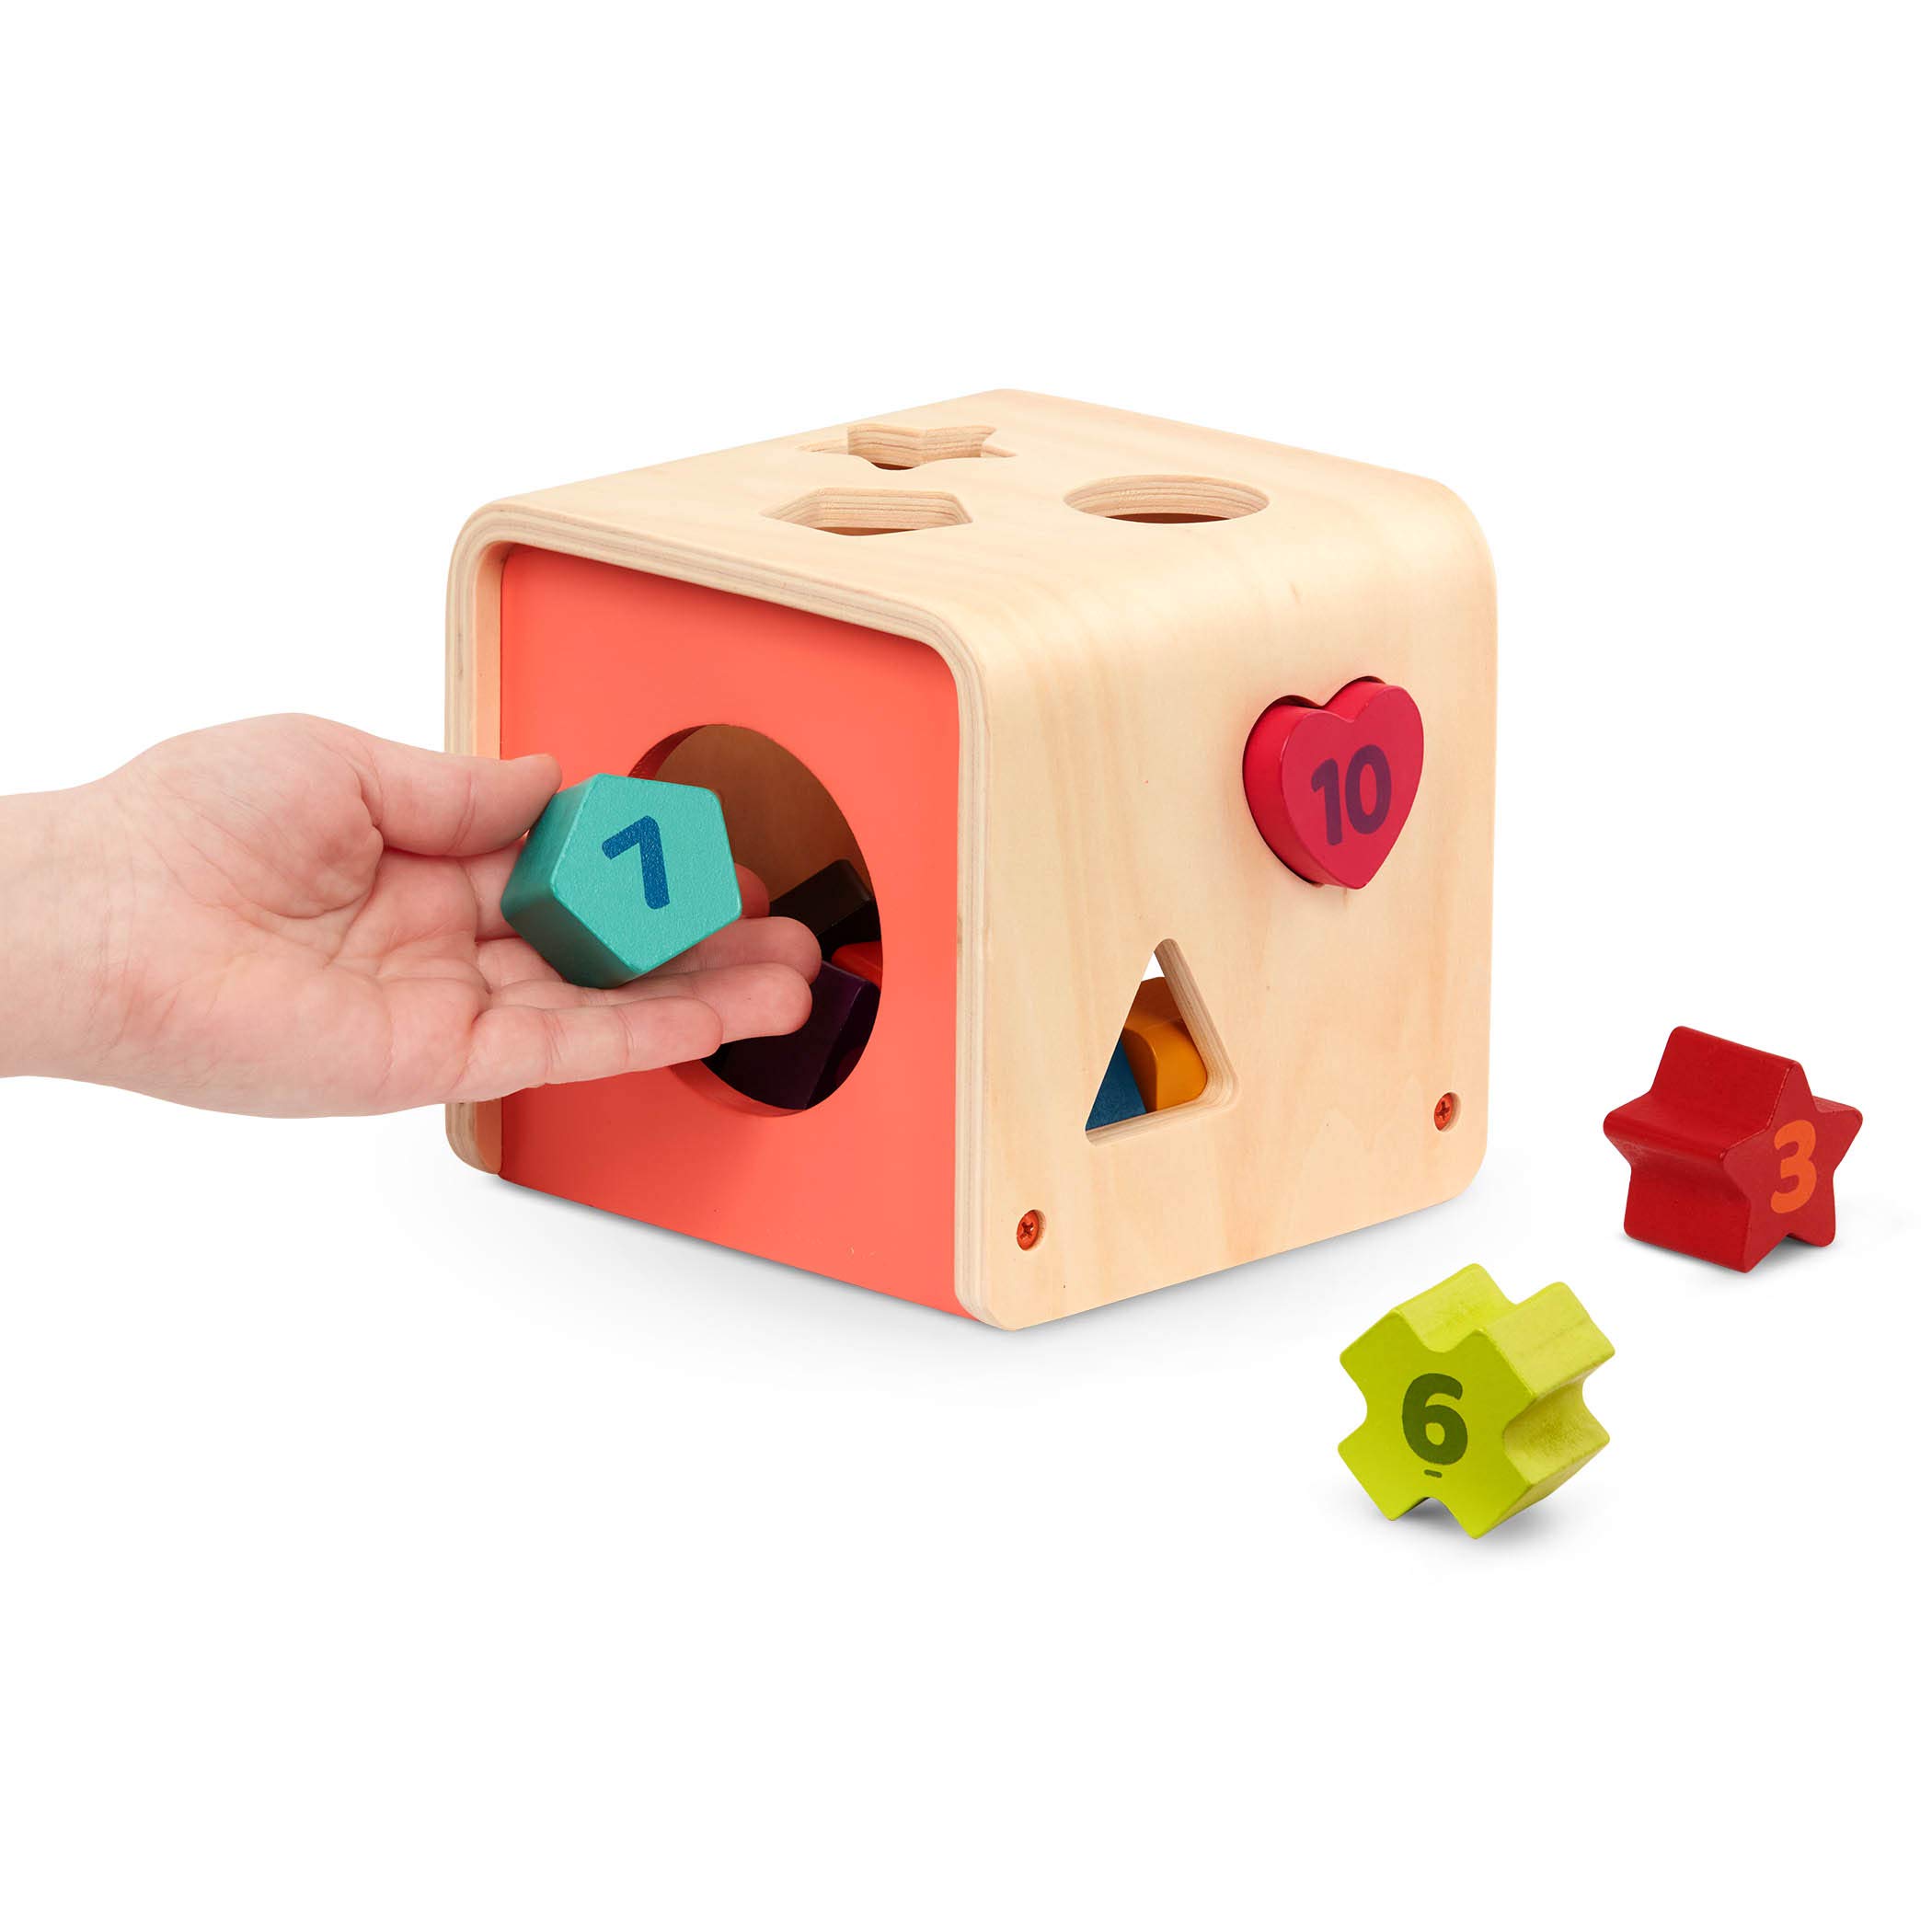 Battat – Shape Sorter for Toddlers, Kids – Wooden Learning Cube – Sorting Toy – 10 Colorful Wood Shapes with Numbers – Count & Sort Cube – 1 Year + , Orange